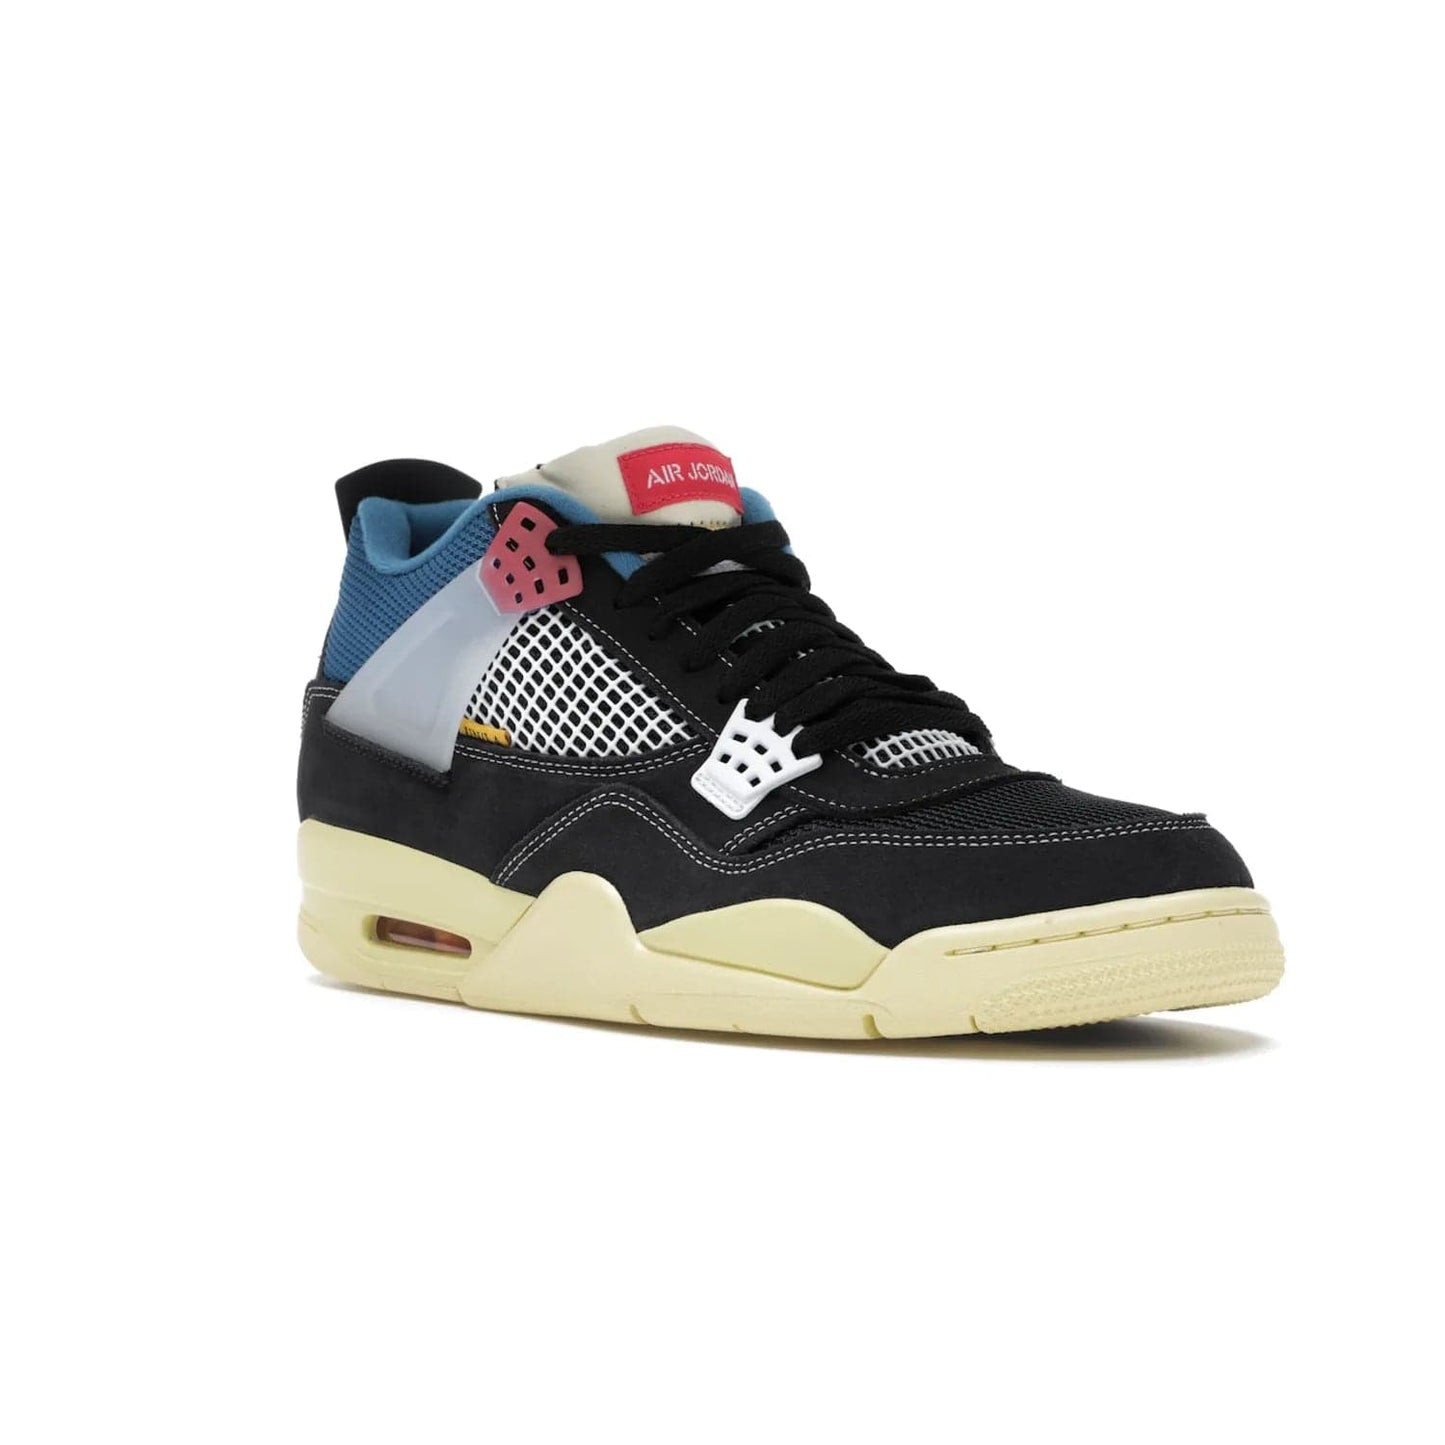 Jordan 4 Retro Union Off Noir - Image 5 - Only at www.BallersClubKickz.com - Introducing the Air Jordan 4 Retro Union LA Off Noir: a stylish collab featuring unique black, white, blue and light fusion red. Features mesh, suede and nylon materials, Nike Air heel & wings finished with infrared accents. Get yours in August 2020 and take pride of place in any rotation.